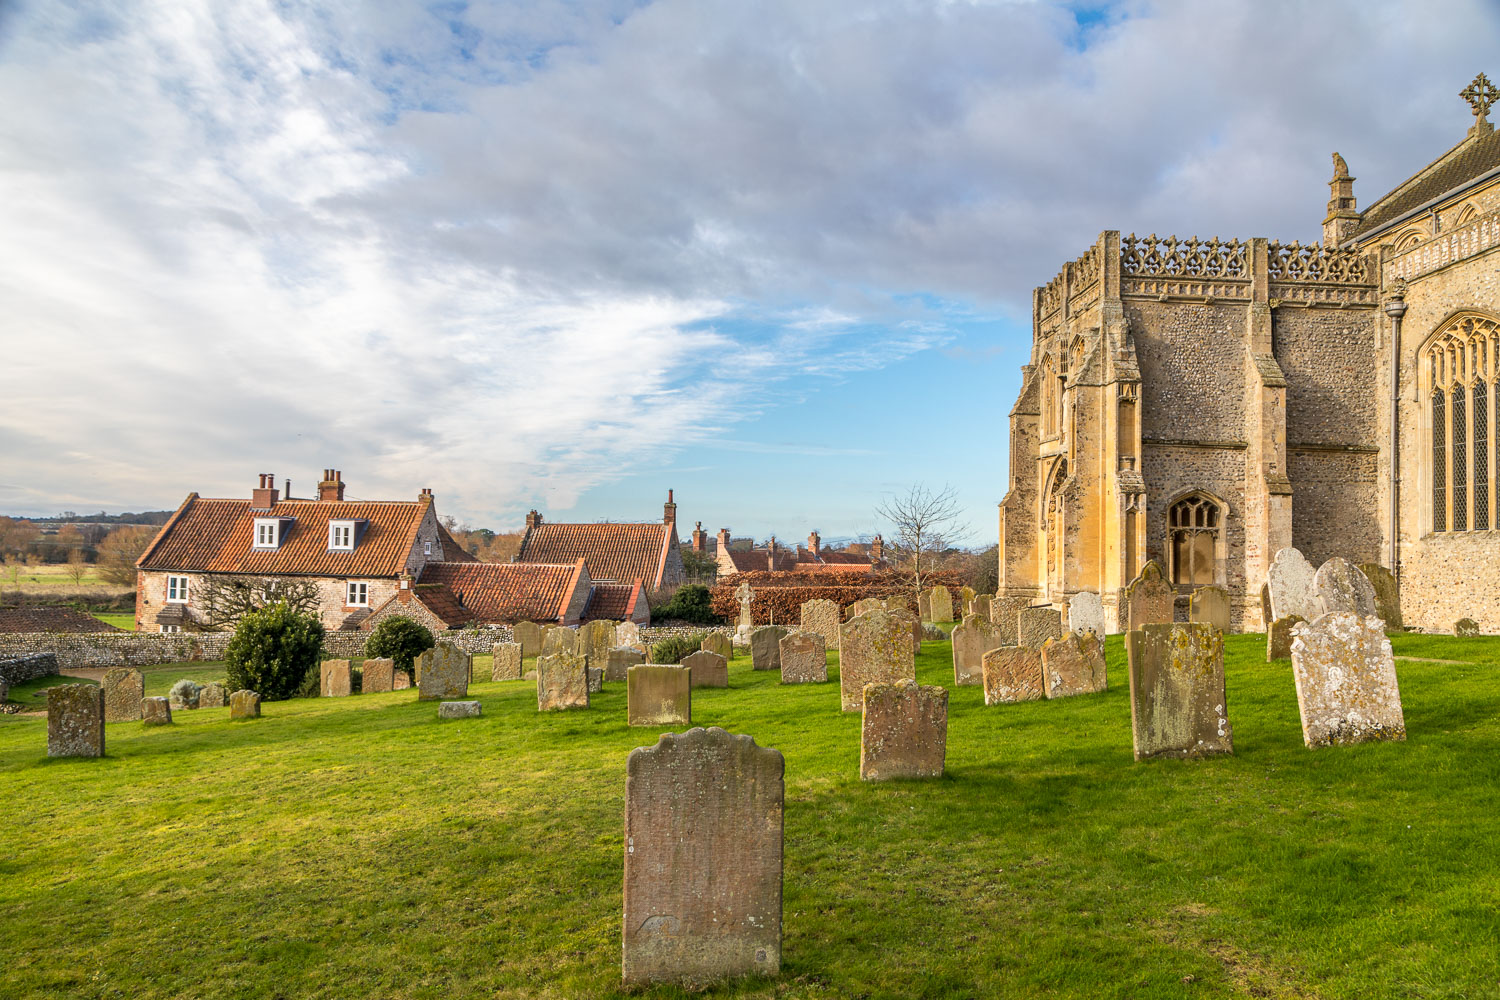 St Margaret's Church, Cley next the Sea